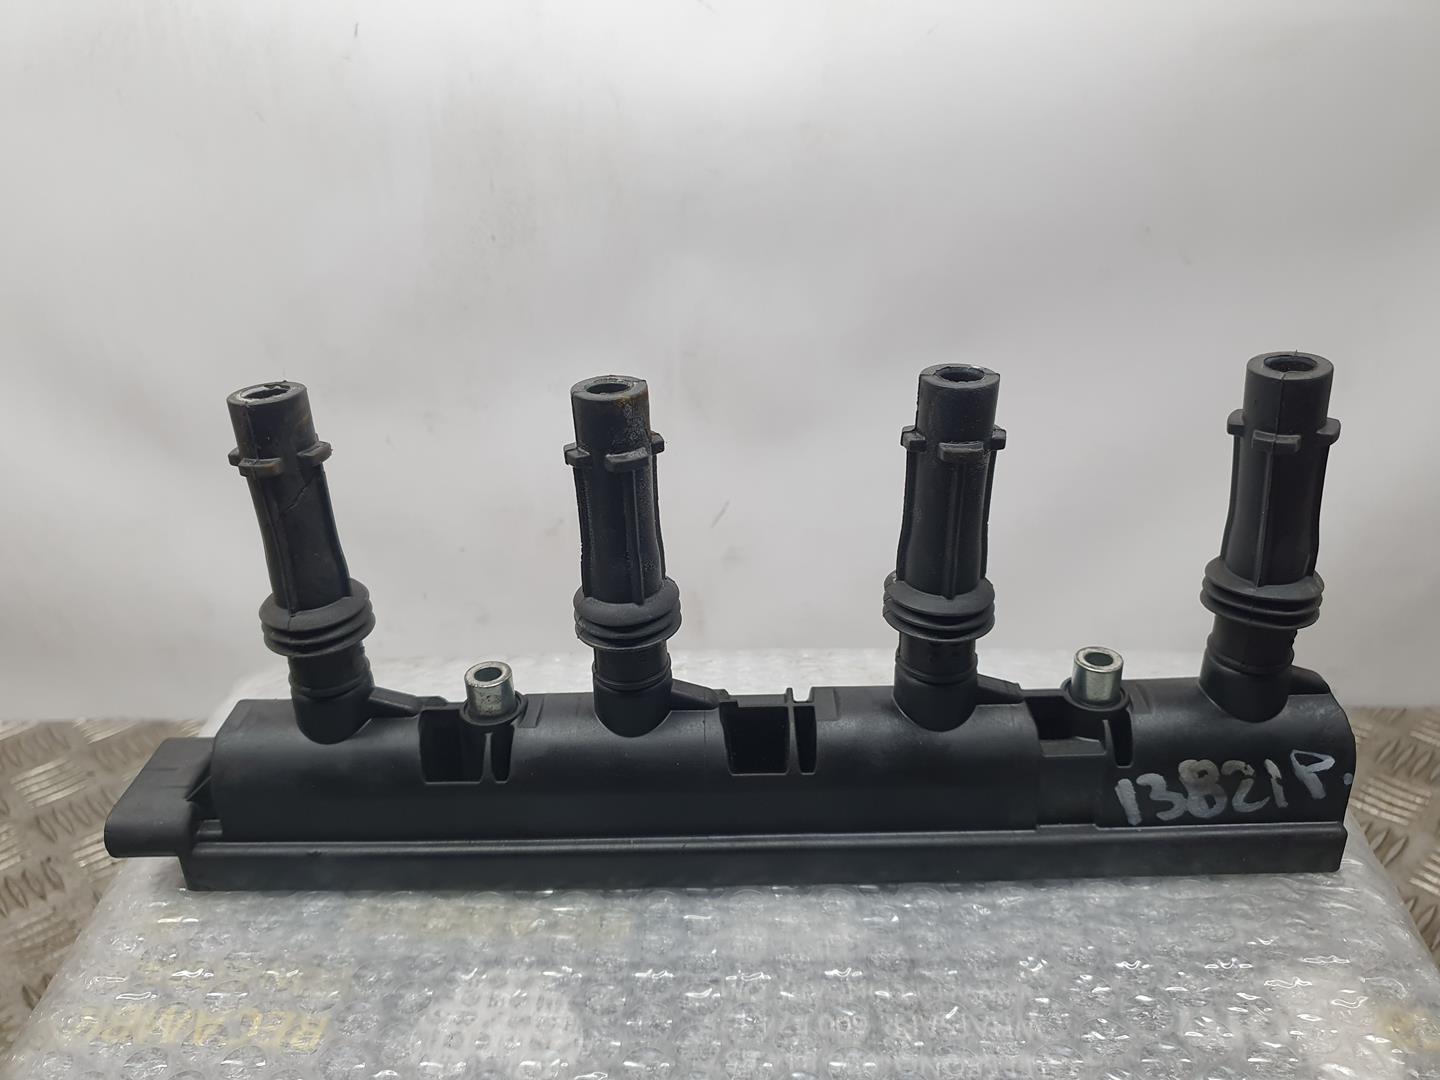 OPEL Corsa D (2006-2020) High Voltage Ignition Coil GM25198623, 19005362, DEPLHI 23633264